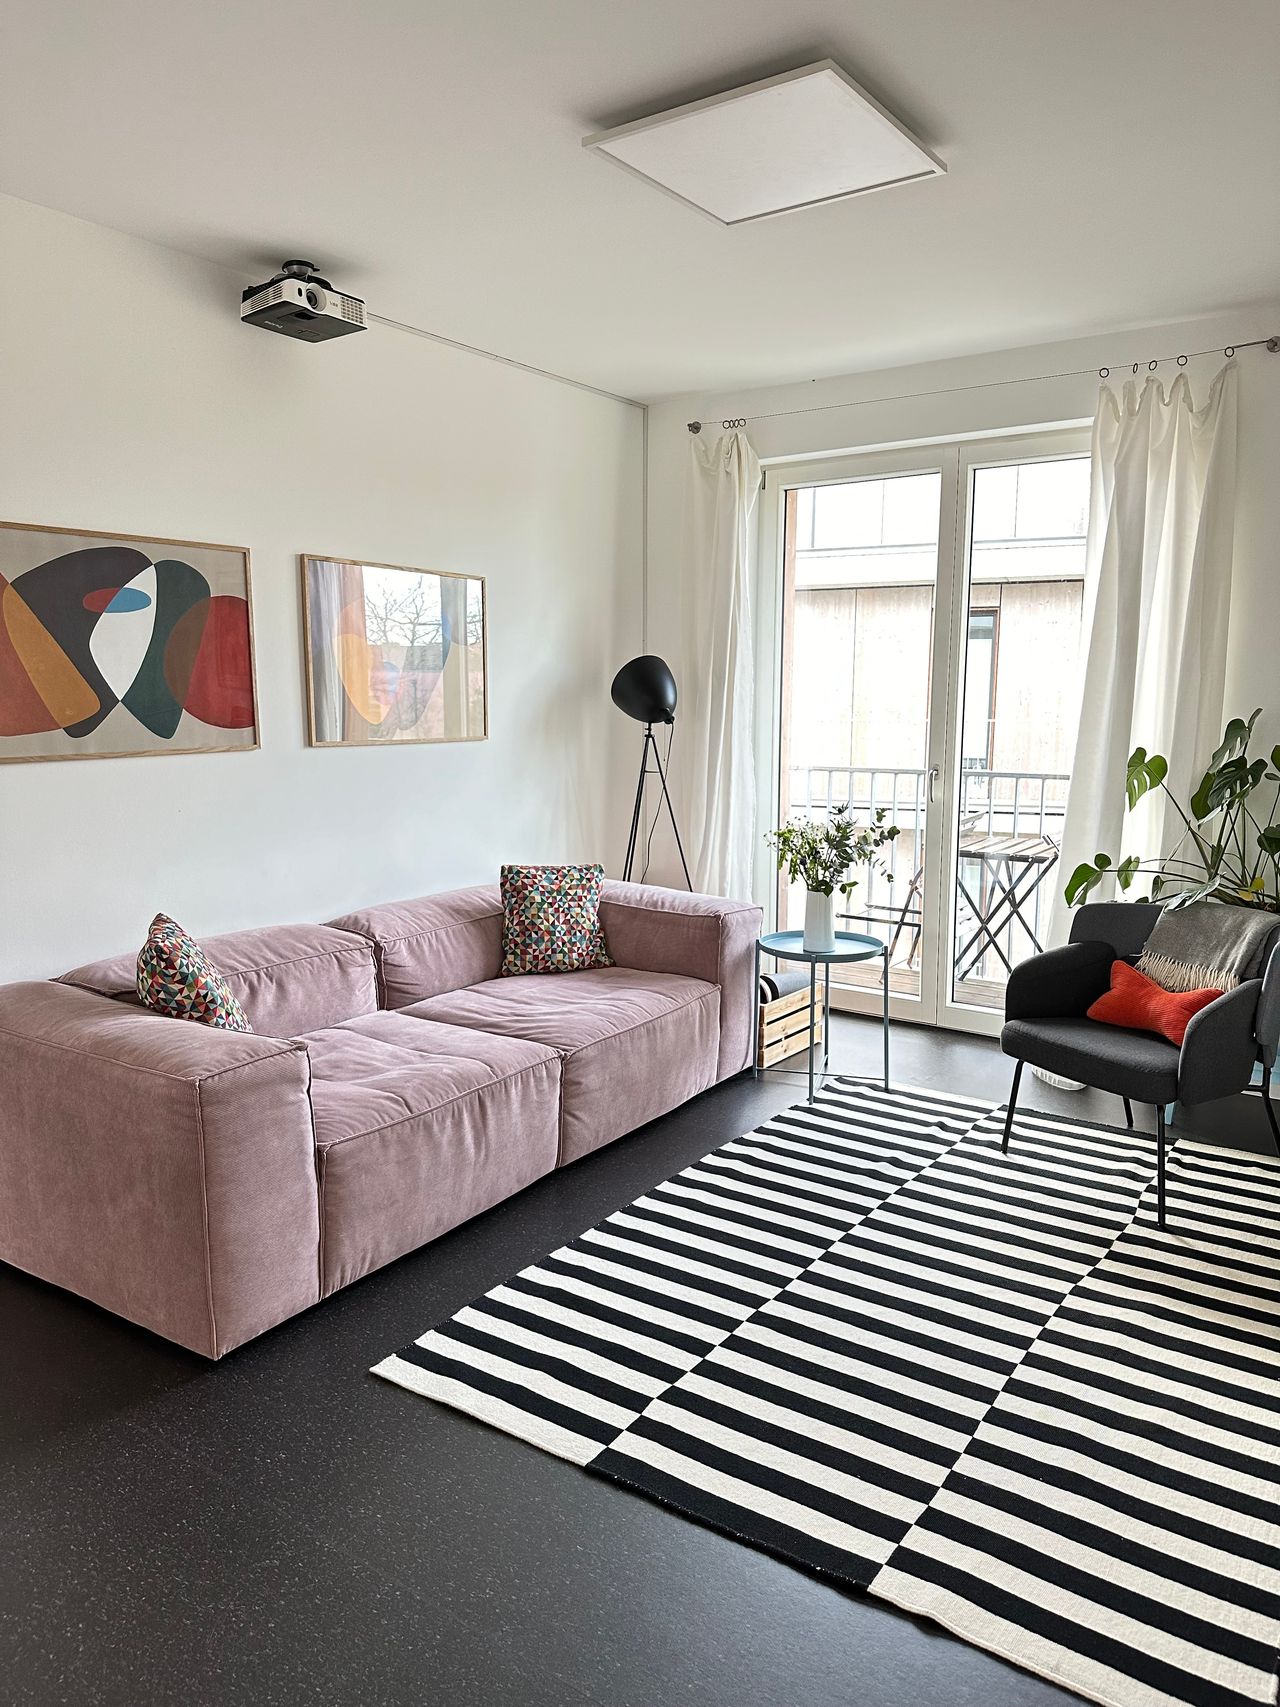 3 bedroom apartment (4 rooms) with community garden and terrace in Berlin-Pankow perfect for families (Furnished All Inclusive)